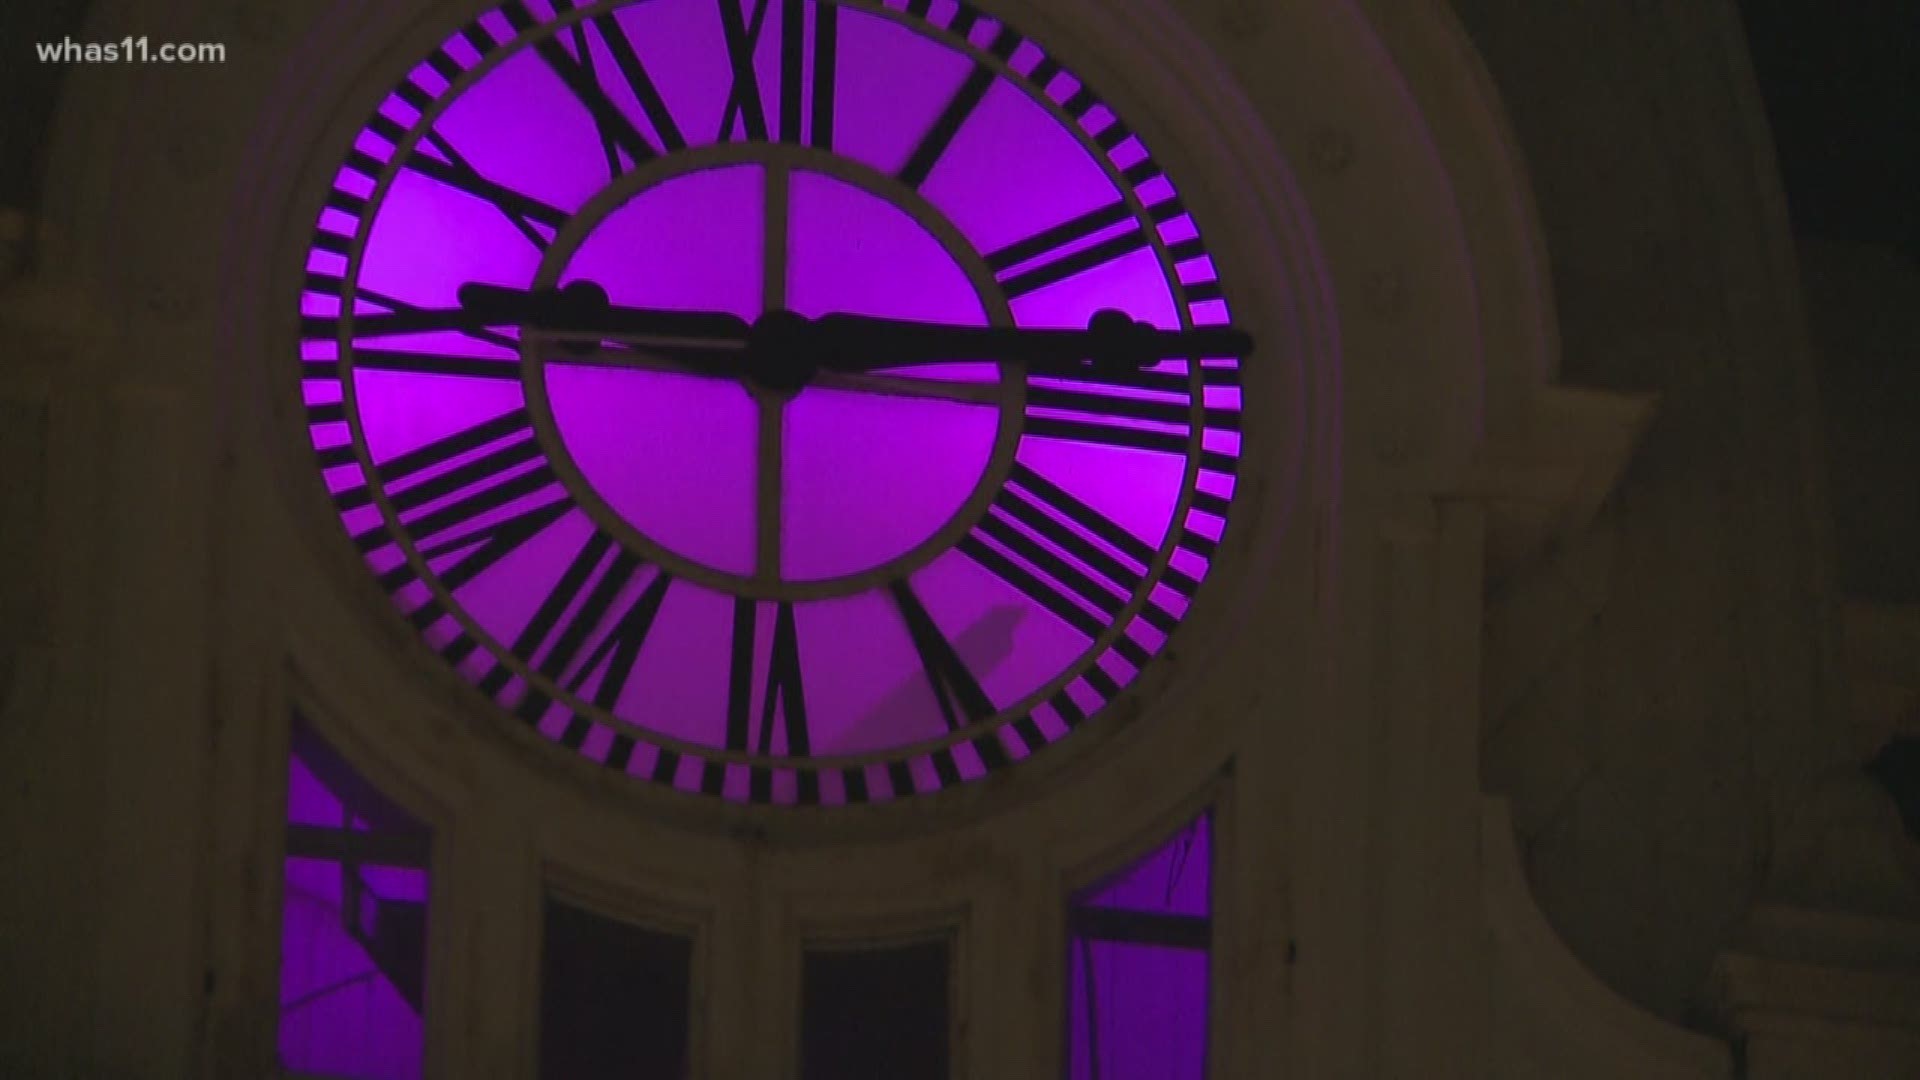 The historic City Clock Tower has been lit up pink to support breast cancer awareness.